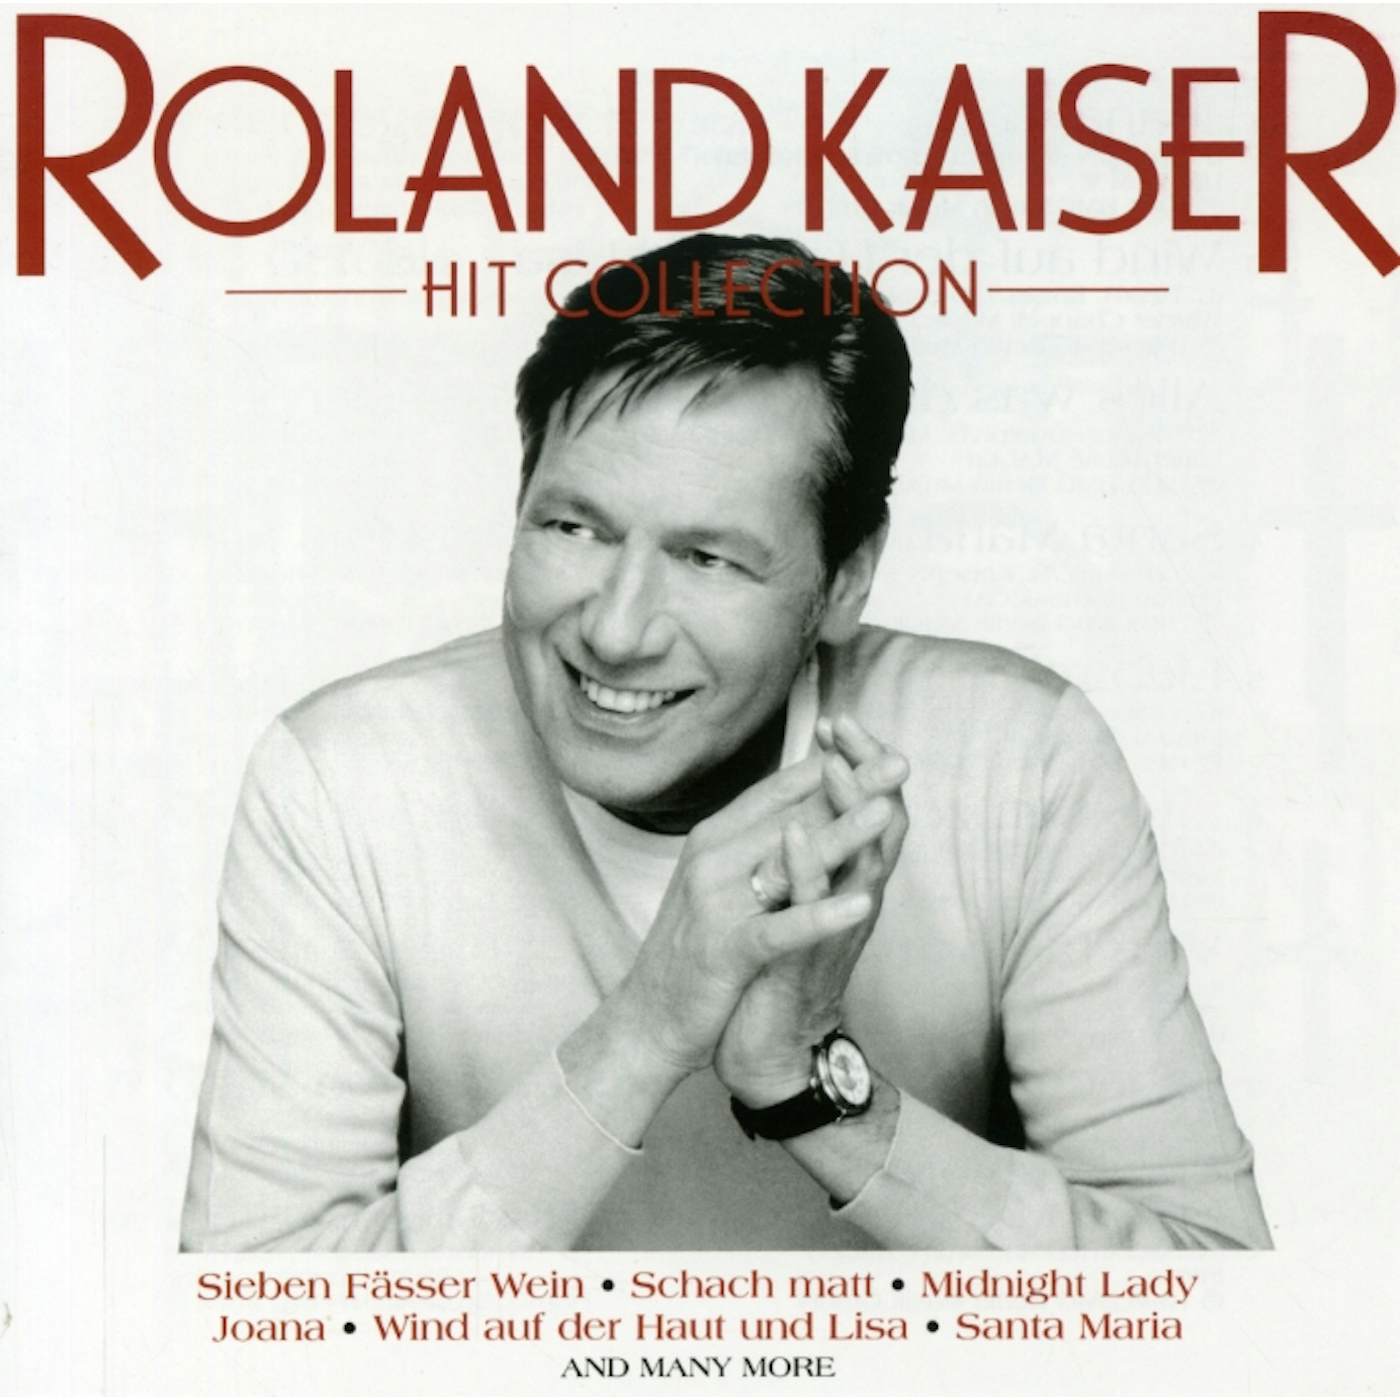 Roland Kaiser HIT COLLECTION CD